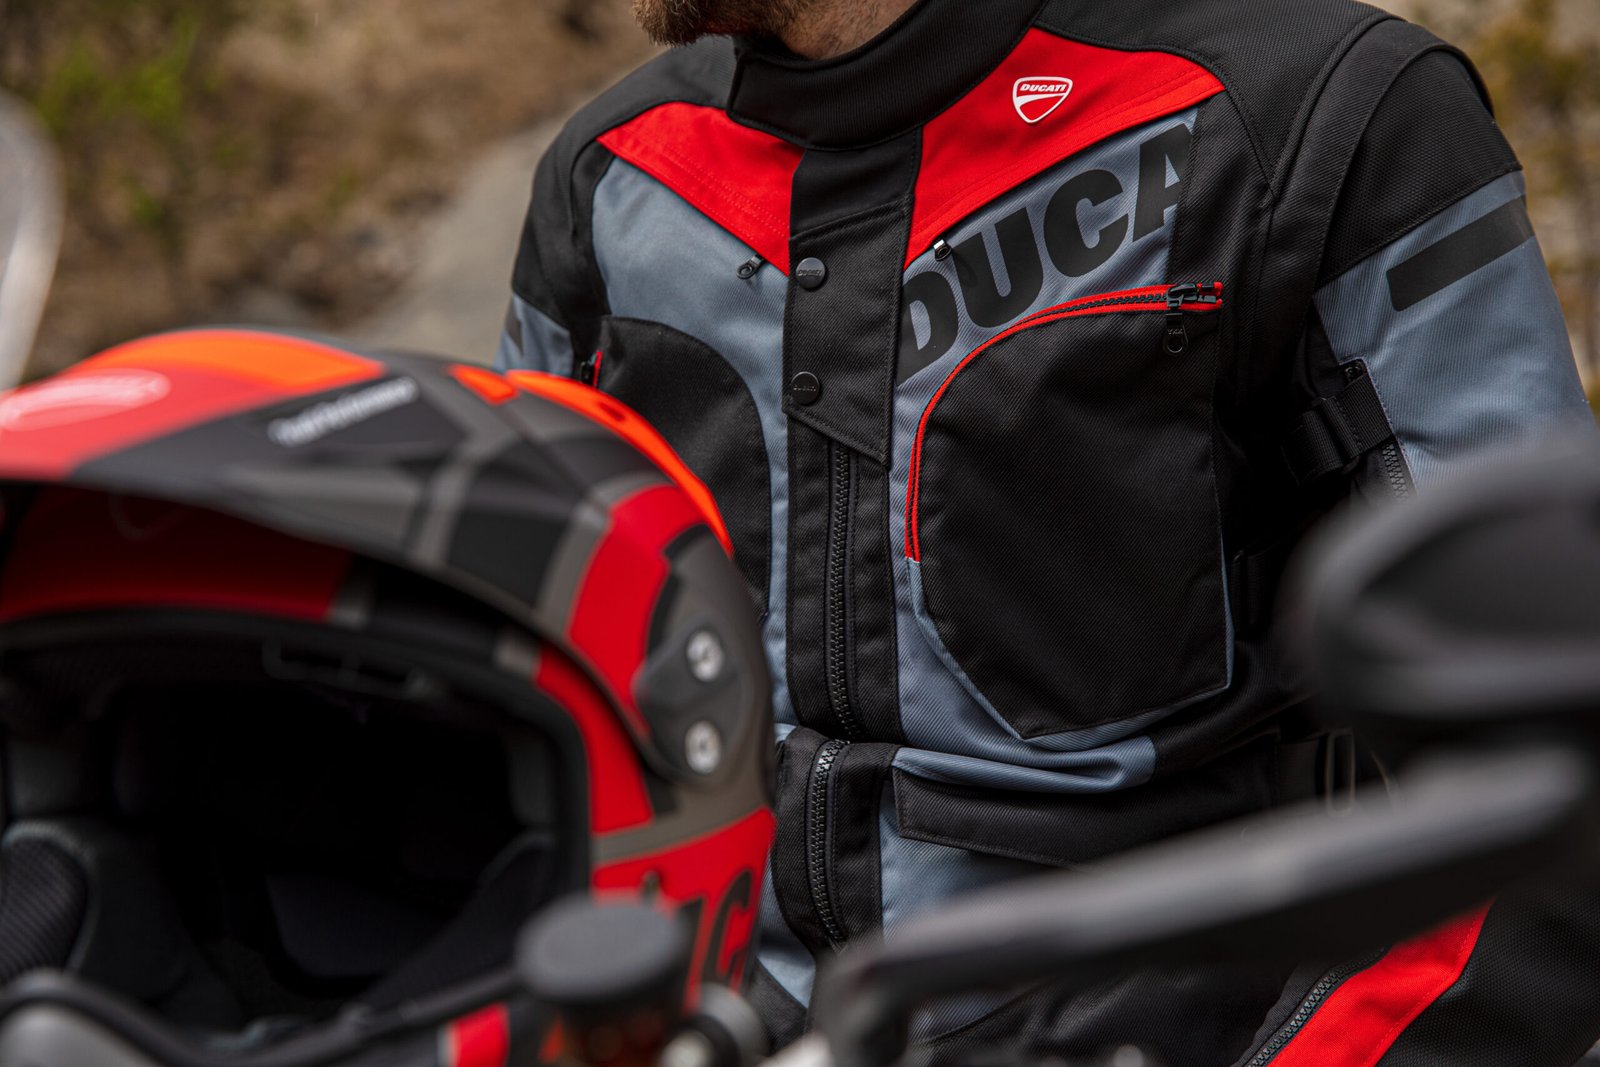 MY23 - Ducati Apparel Collection 2023